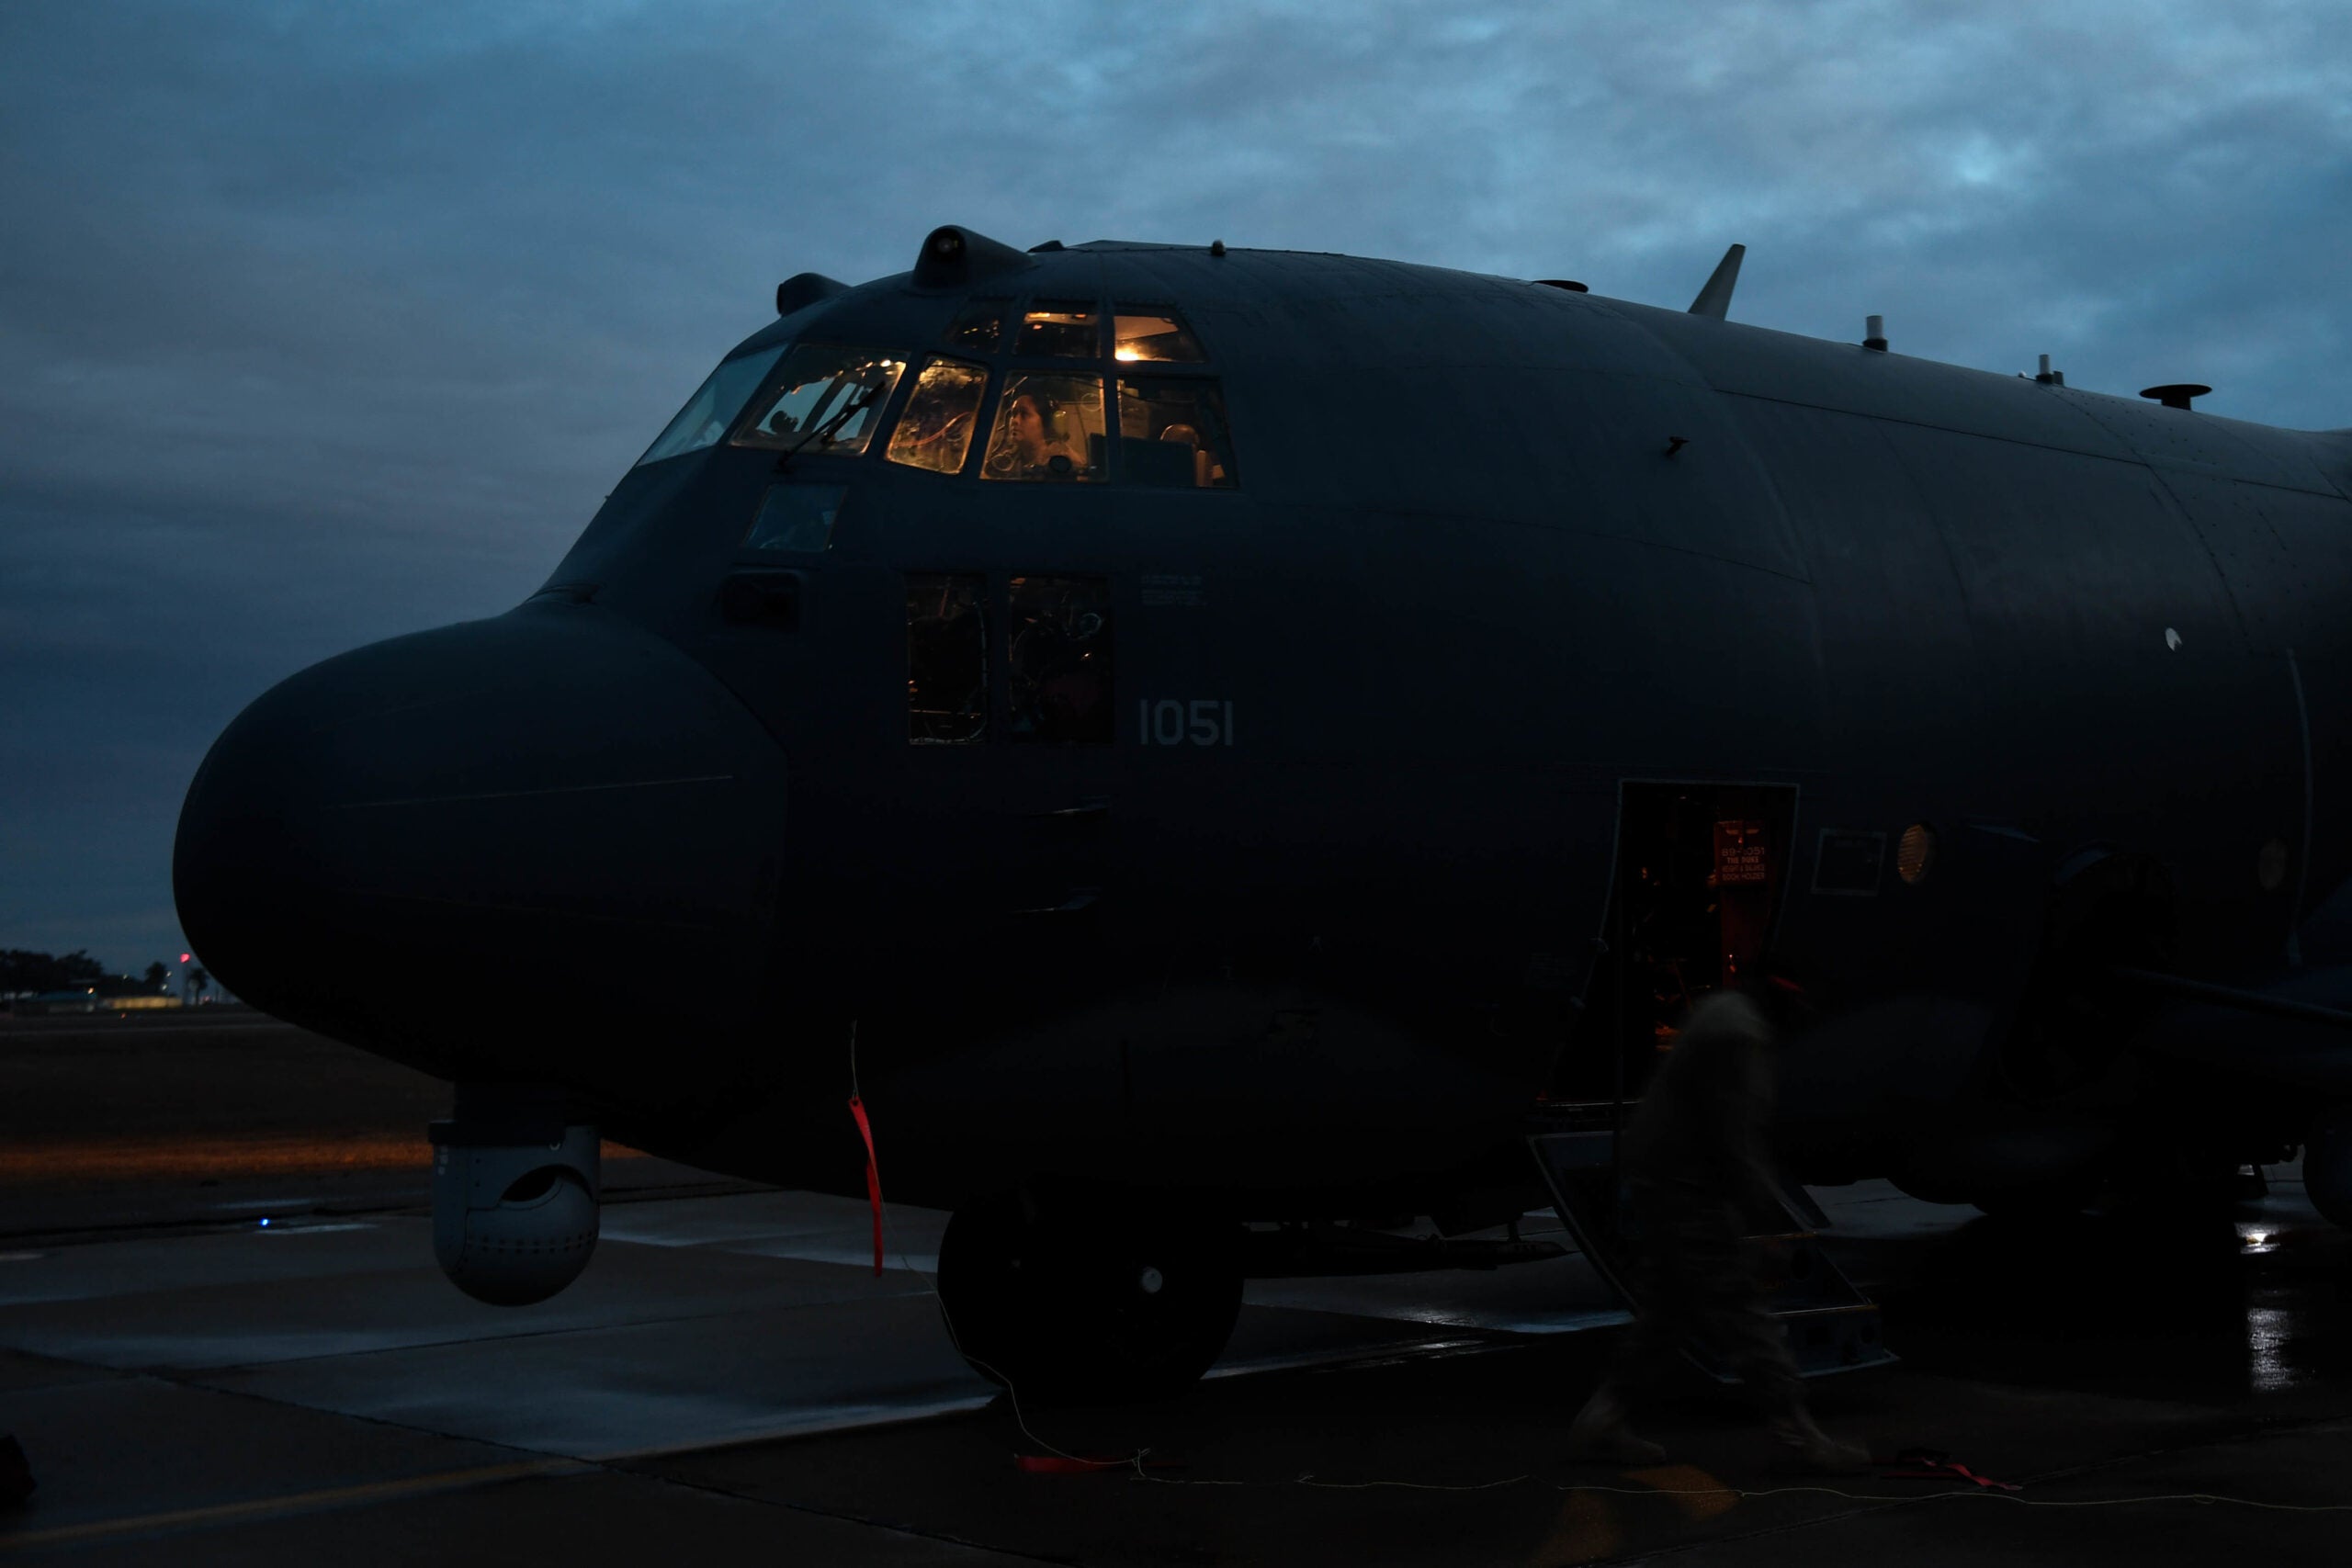 An aircrew from the 16th Special Operations Squadron at Cannon Air Force Base, N.M., lands an AC-130W Stinger II to participate in Emerald Warrior/Trident at the Naval Air Station North Island, Calif., January 15, 2019. Emerald Warrior/Trident is the largest joint special operations exercise where U.S. Special Operations Command forces train to respond to various threats across the spectrum of conflict. (U.S. Air Force photo by Staff Sgt. Erin Piazza)